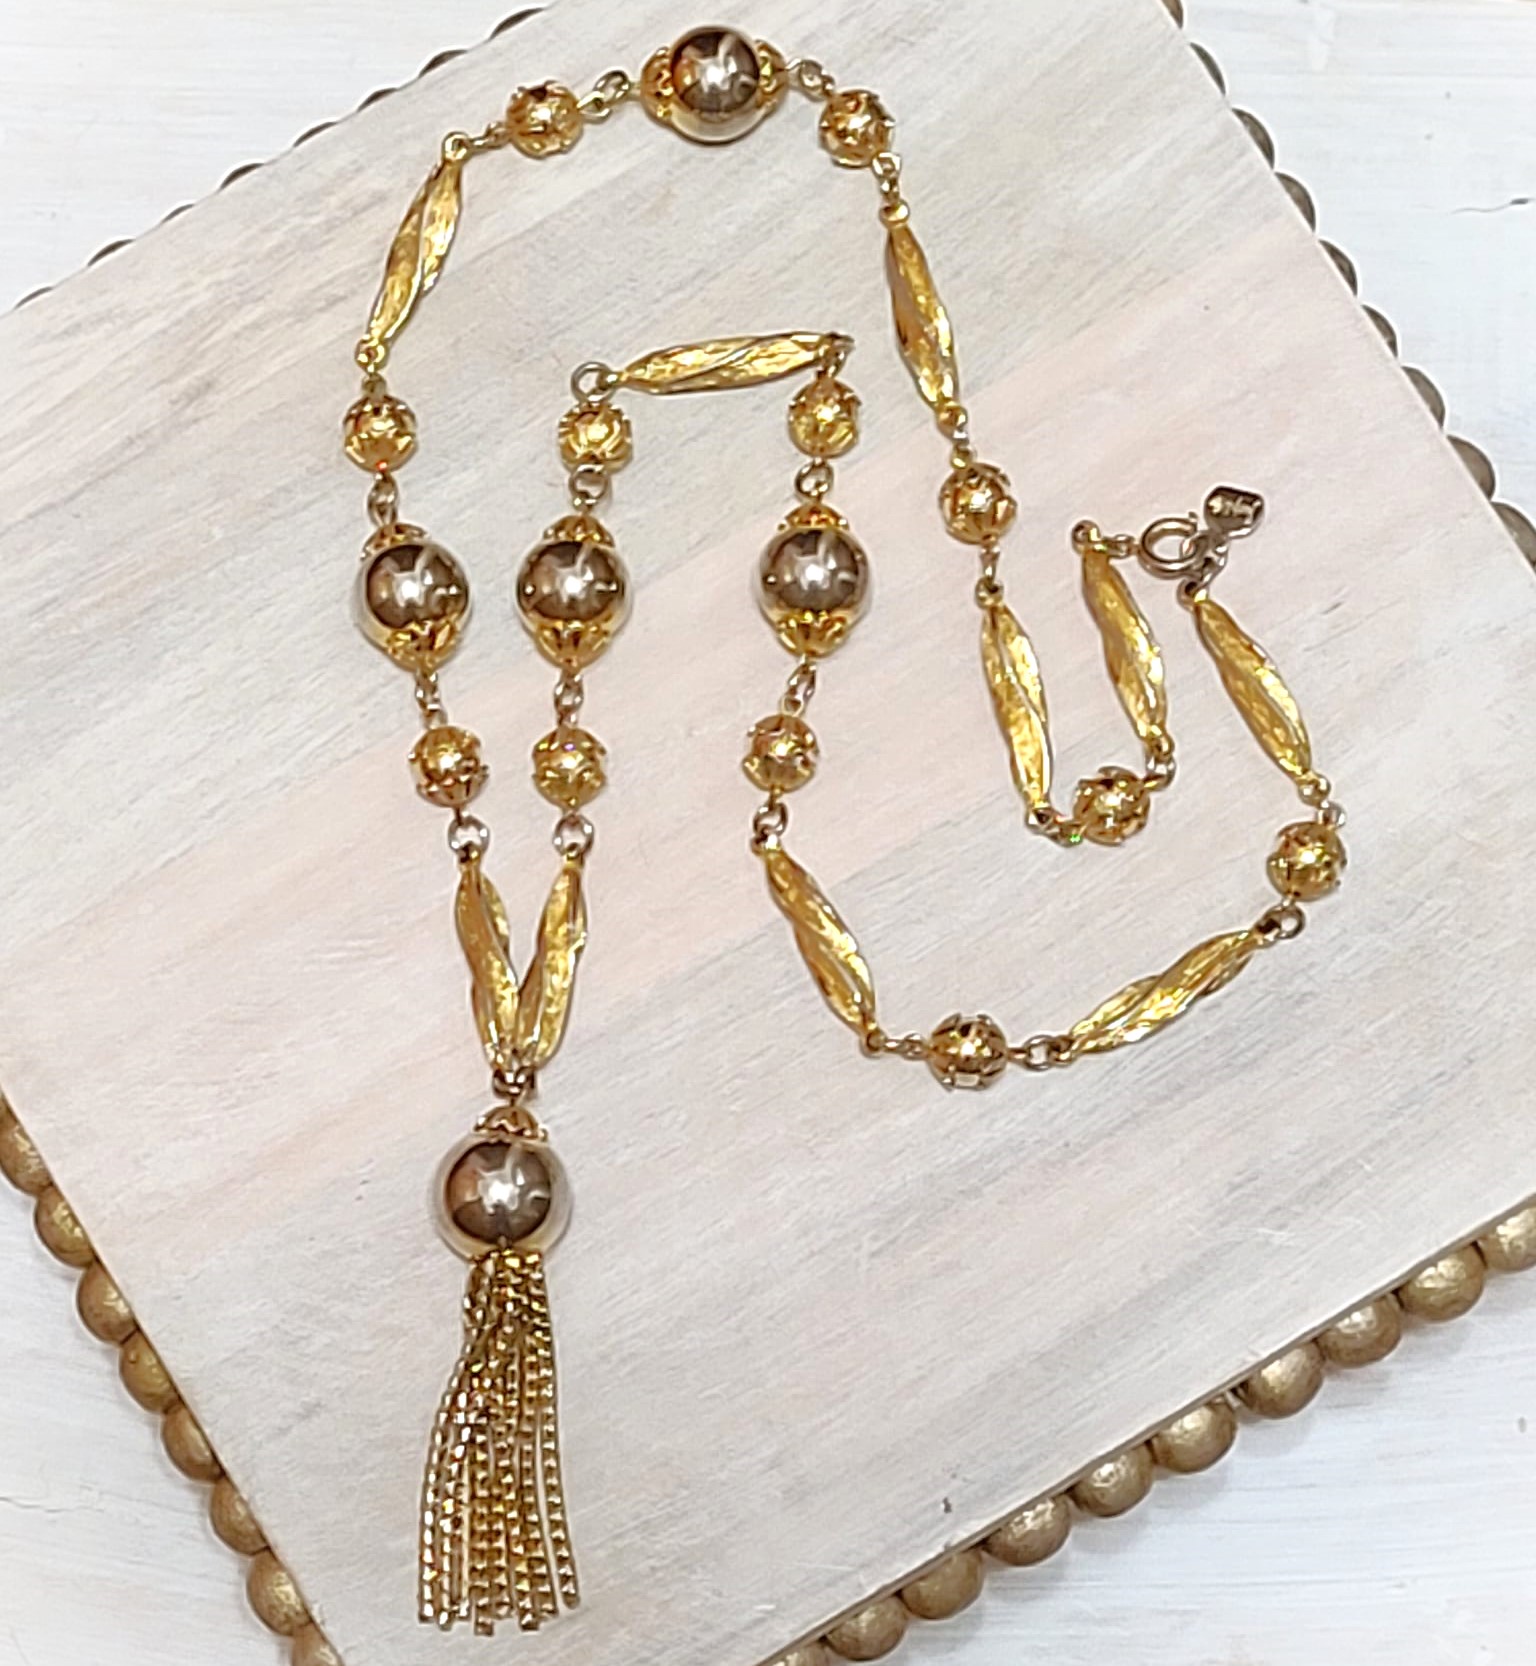 Judy Lee Tassel Necklace in Gold/Silver Beads